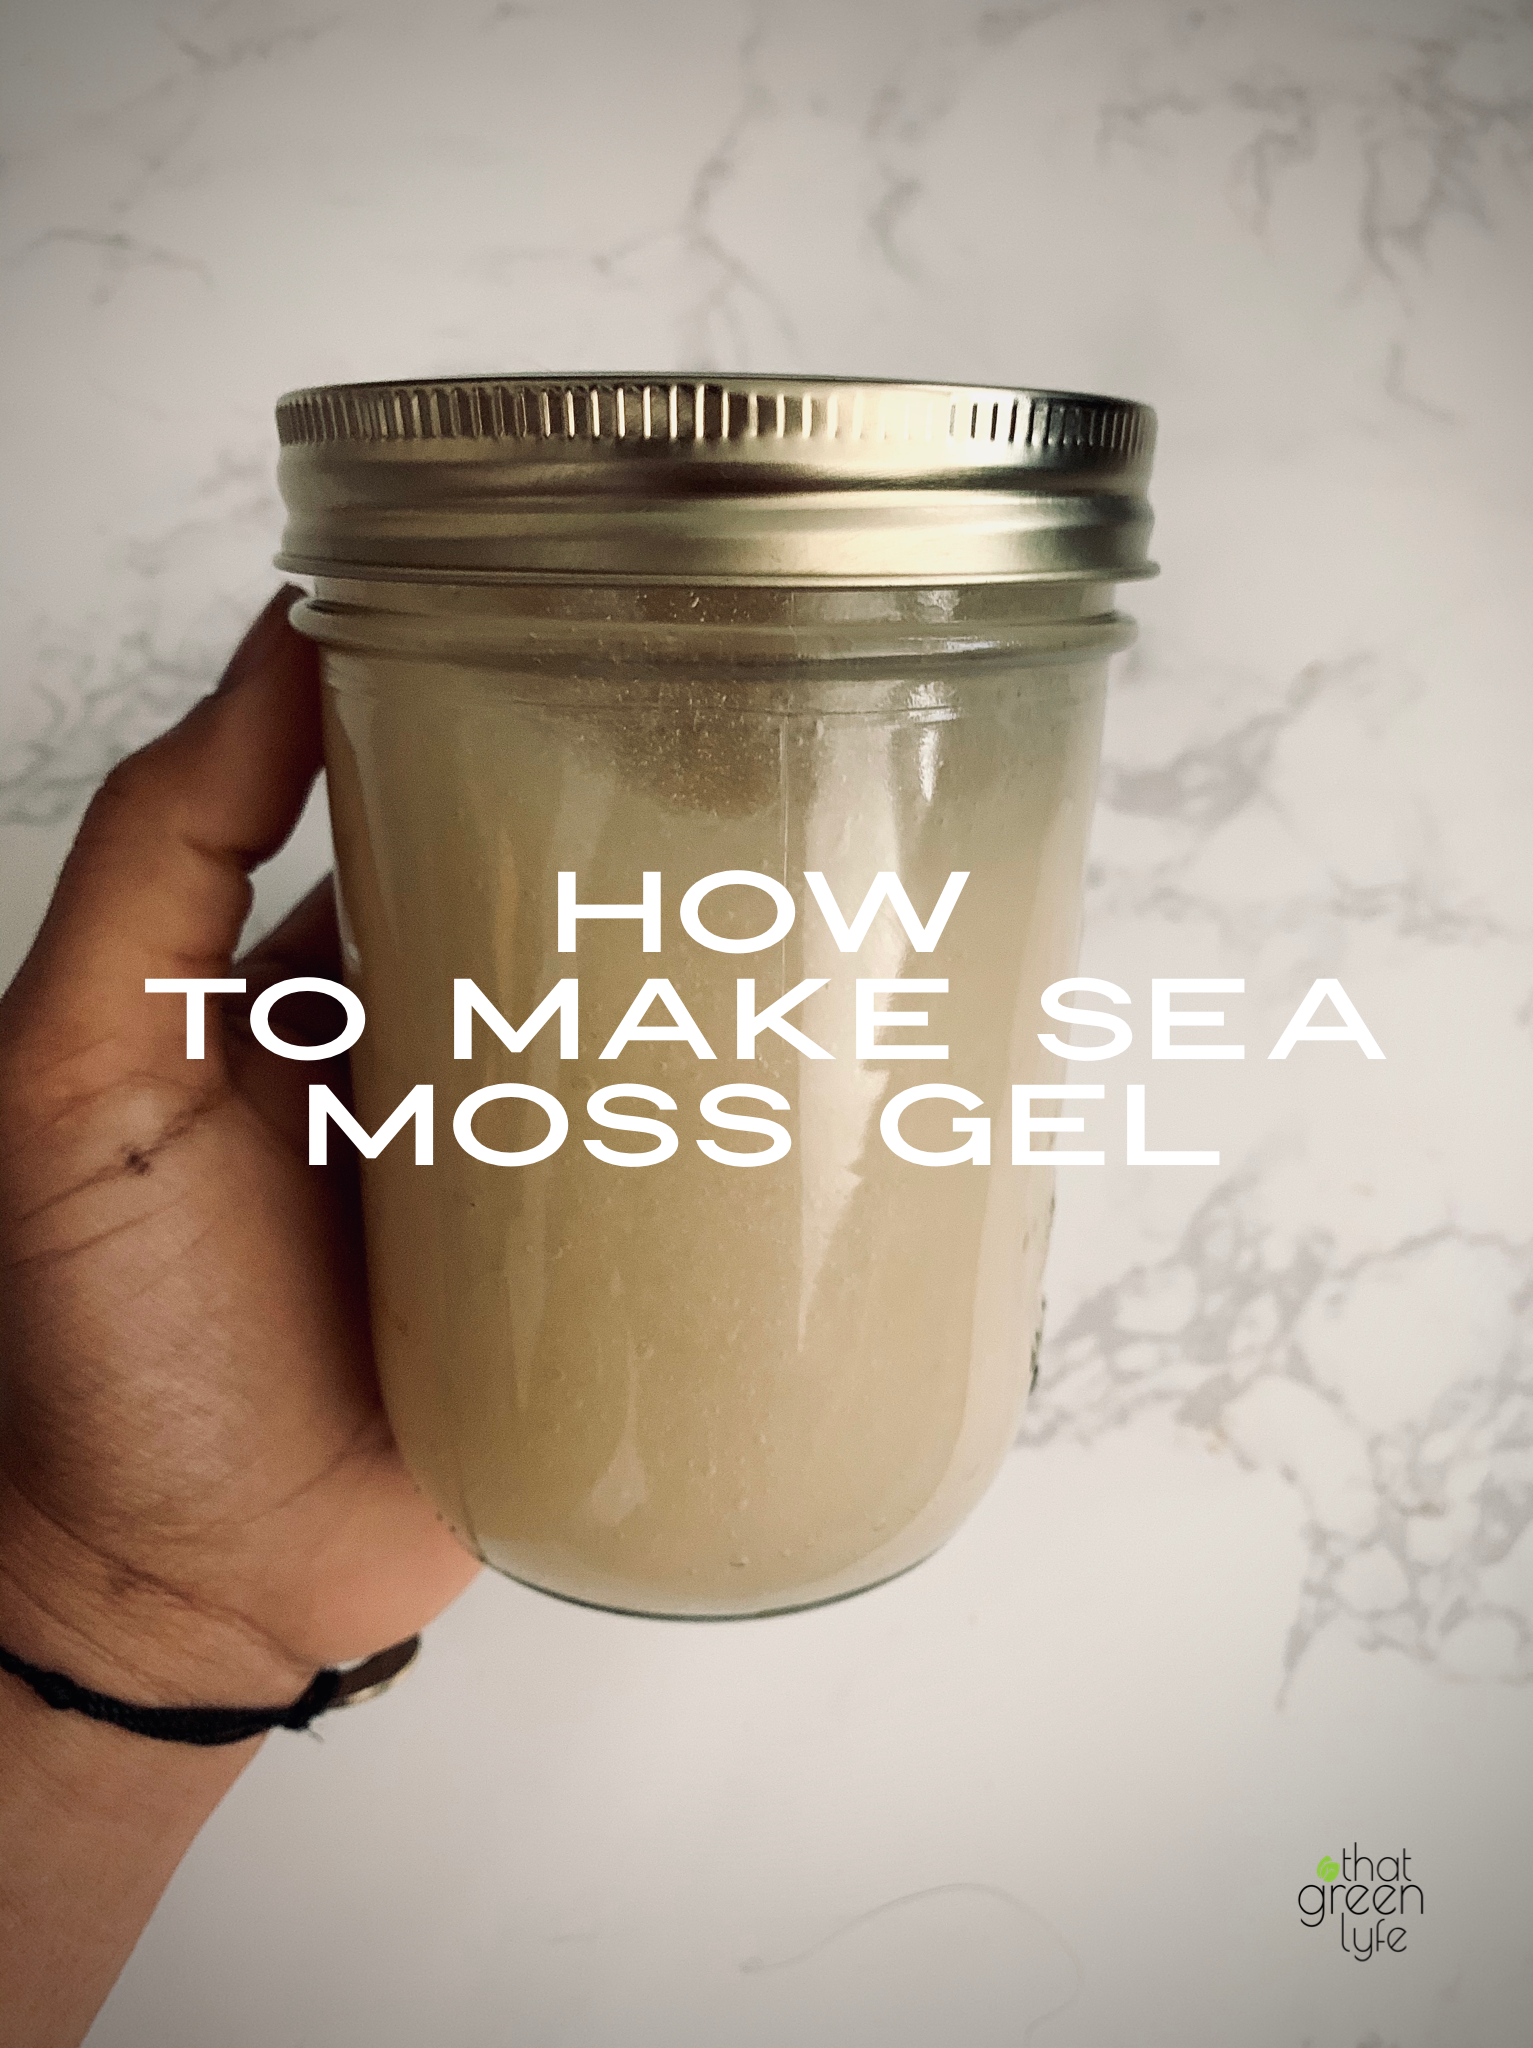 How to Make Sea Moss Gel recipe courtesy of That Green Lyfe